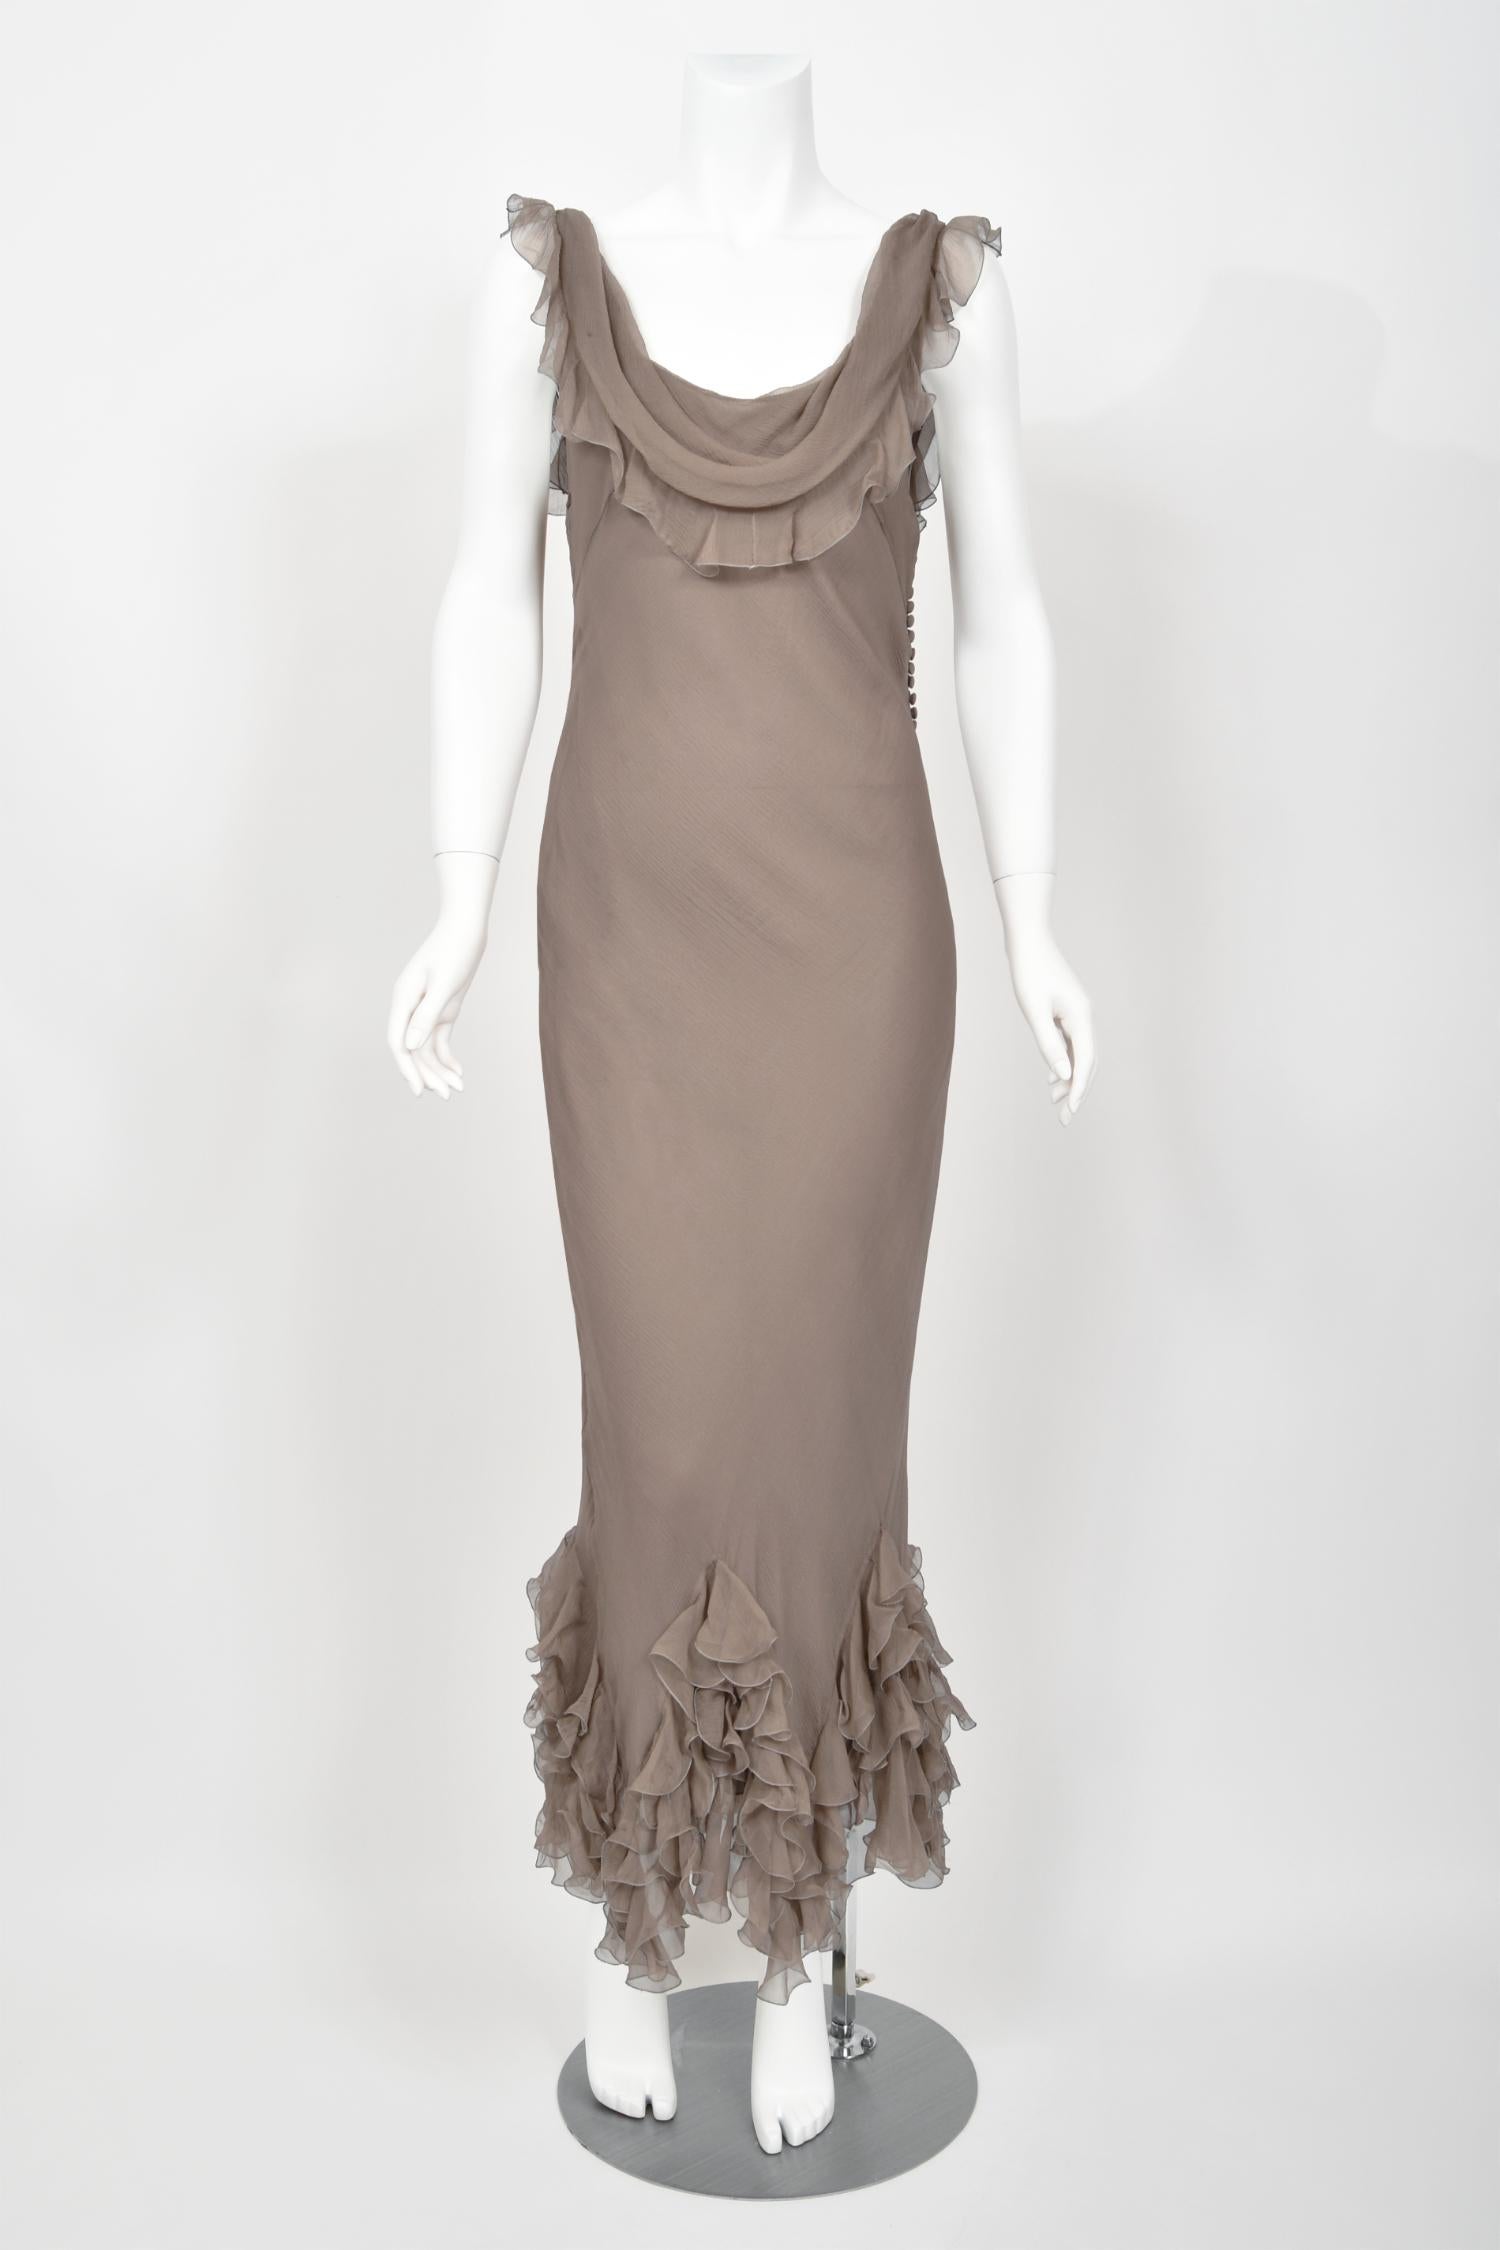 An absolutely breathtaking and highly coveted Christian Dior smoky taupe silk chiffon bias-cut gown dating back to John Galliano's epic 2006 spring/summer collection. John Galliano is widely considered one of the most innovative and influential